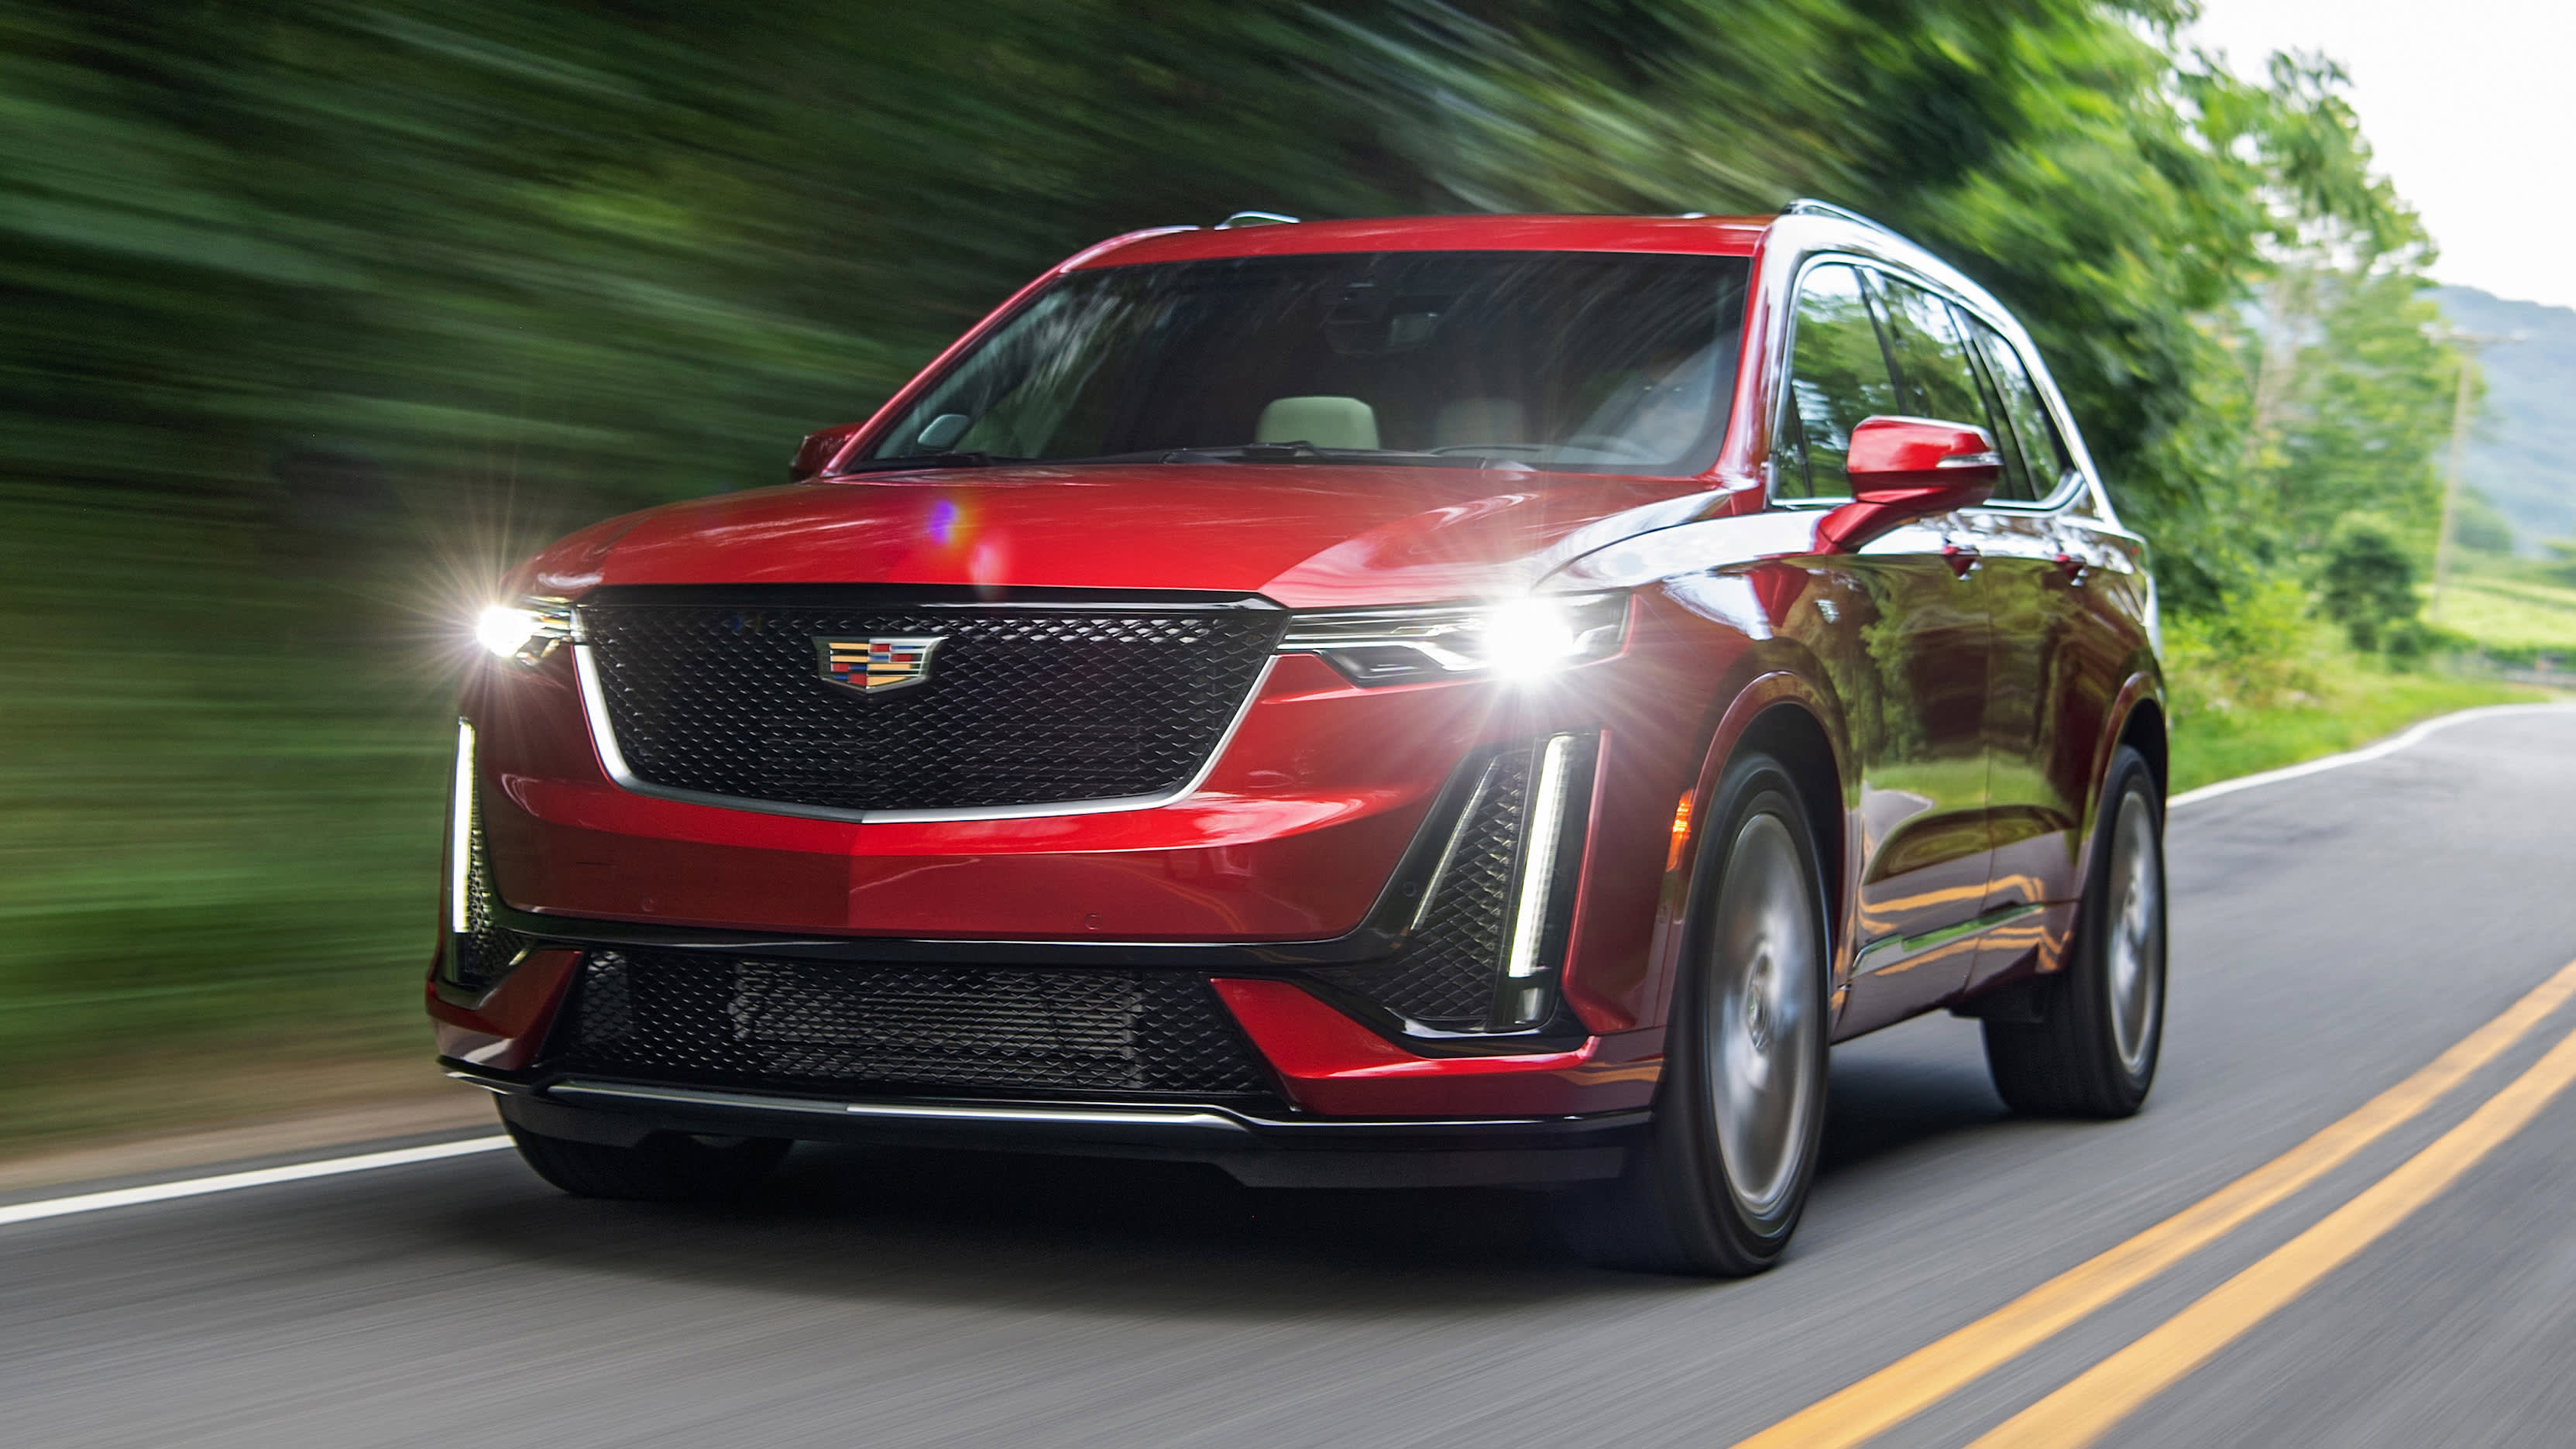 Used Cadillac XT6 Buying Guide